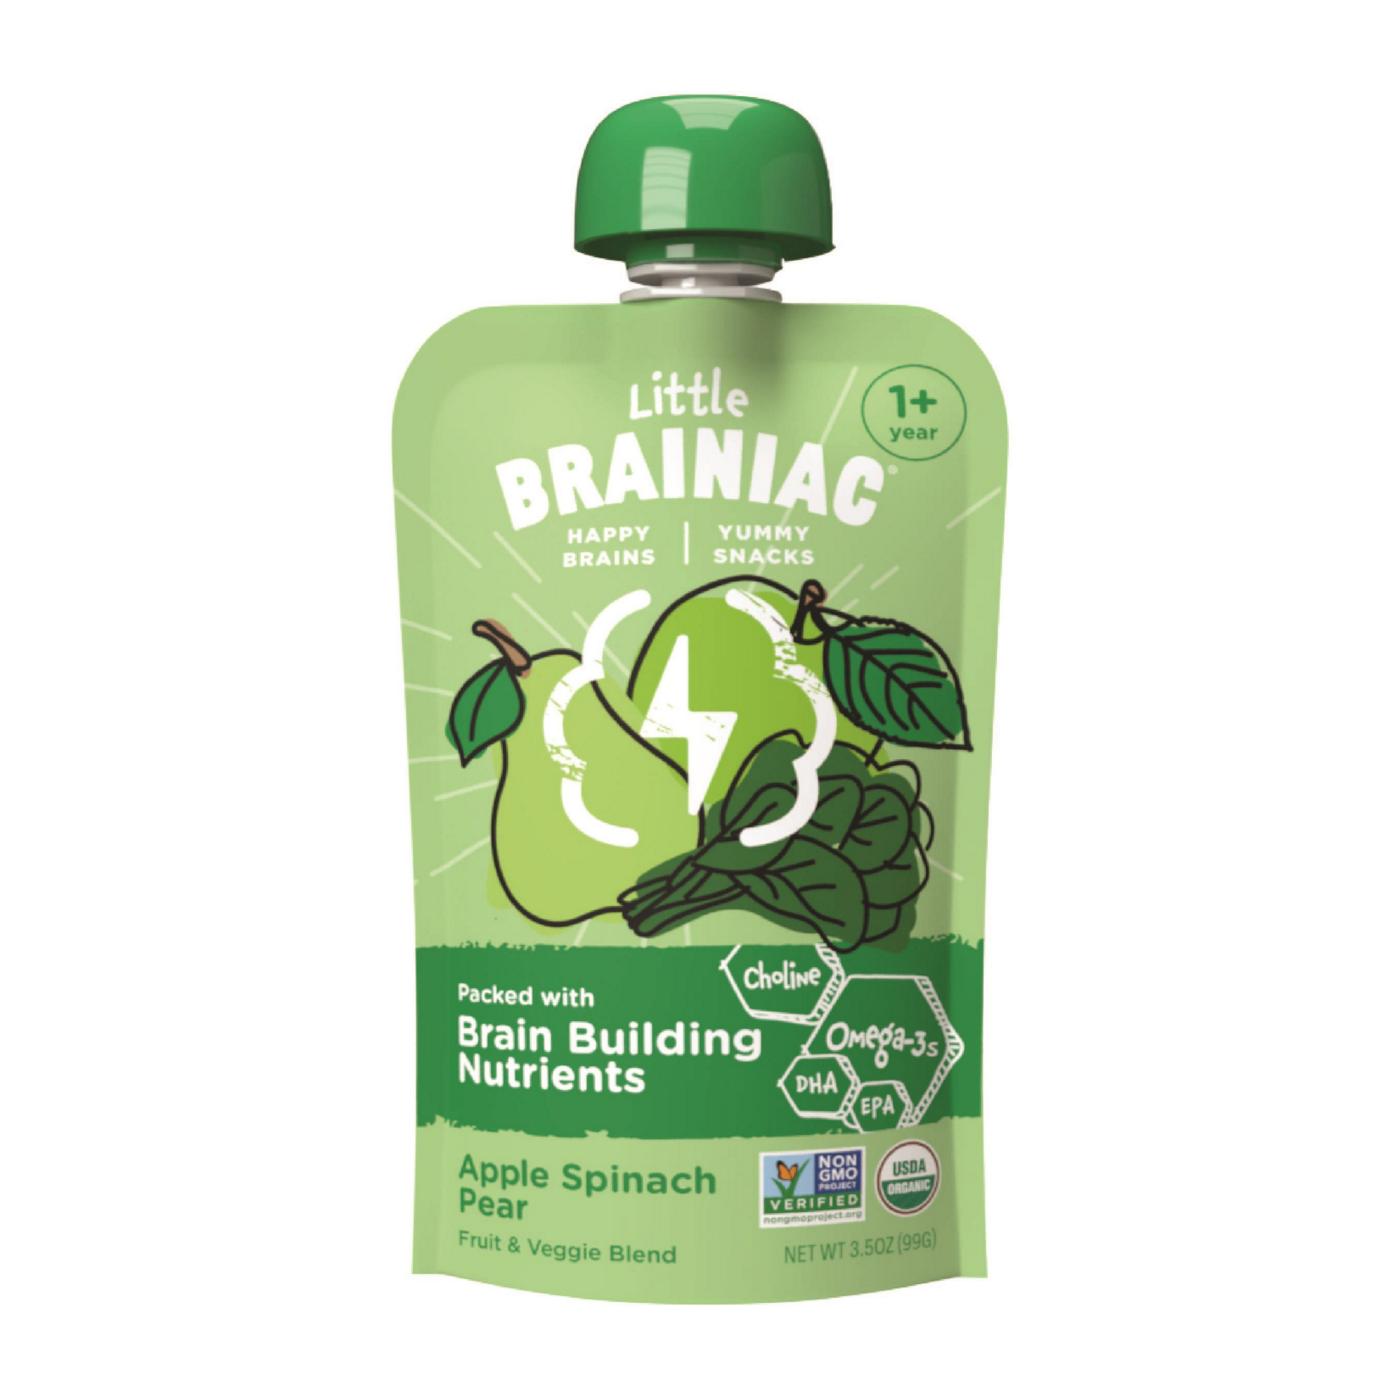 Little Brainiac Organic Baby Food Pouch - Apple Spinach & Pear; image 1 of 5